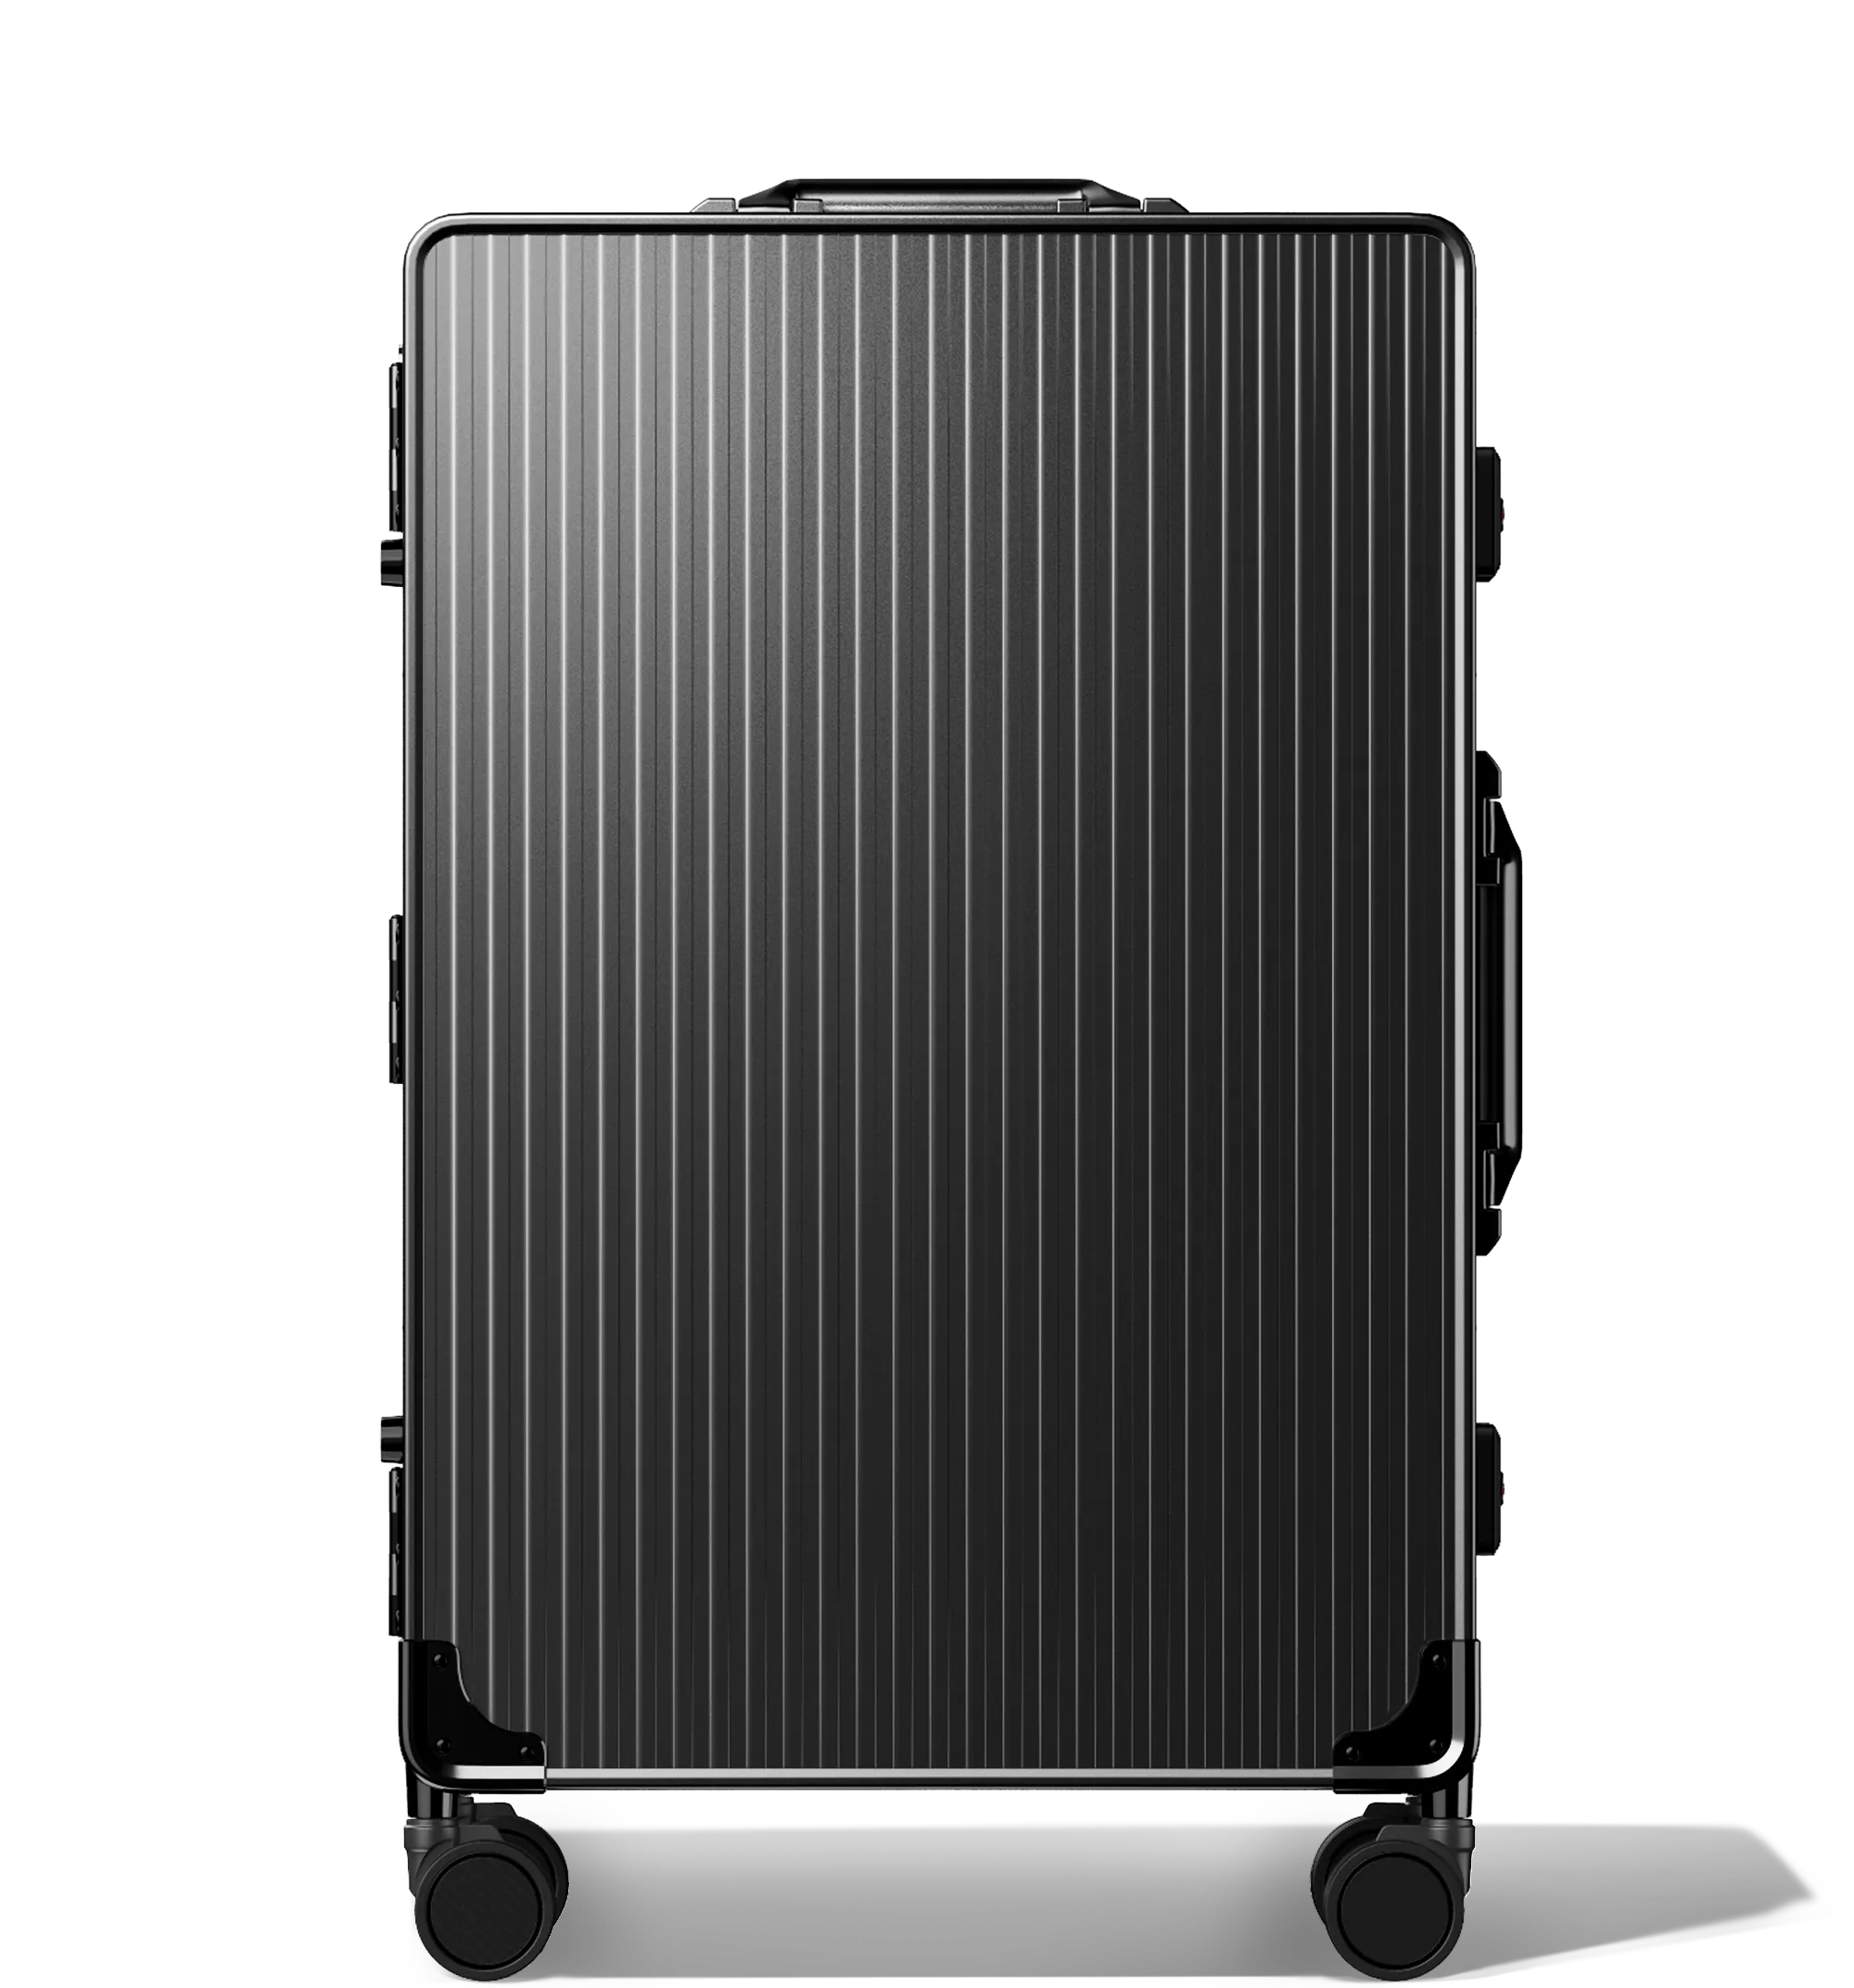 A vertical image of a Check-In 65/25 luggage , upright, black hard-shell aluminium Luggage with a grooved surface design and multi-directional wheels, shown against a white background.